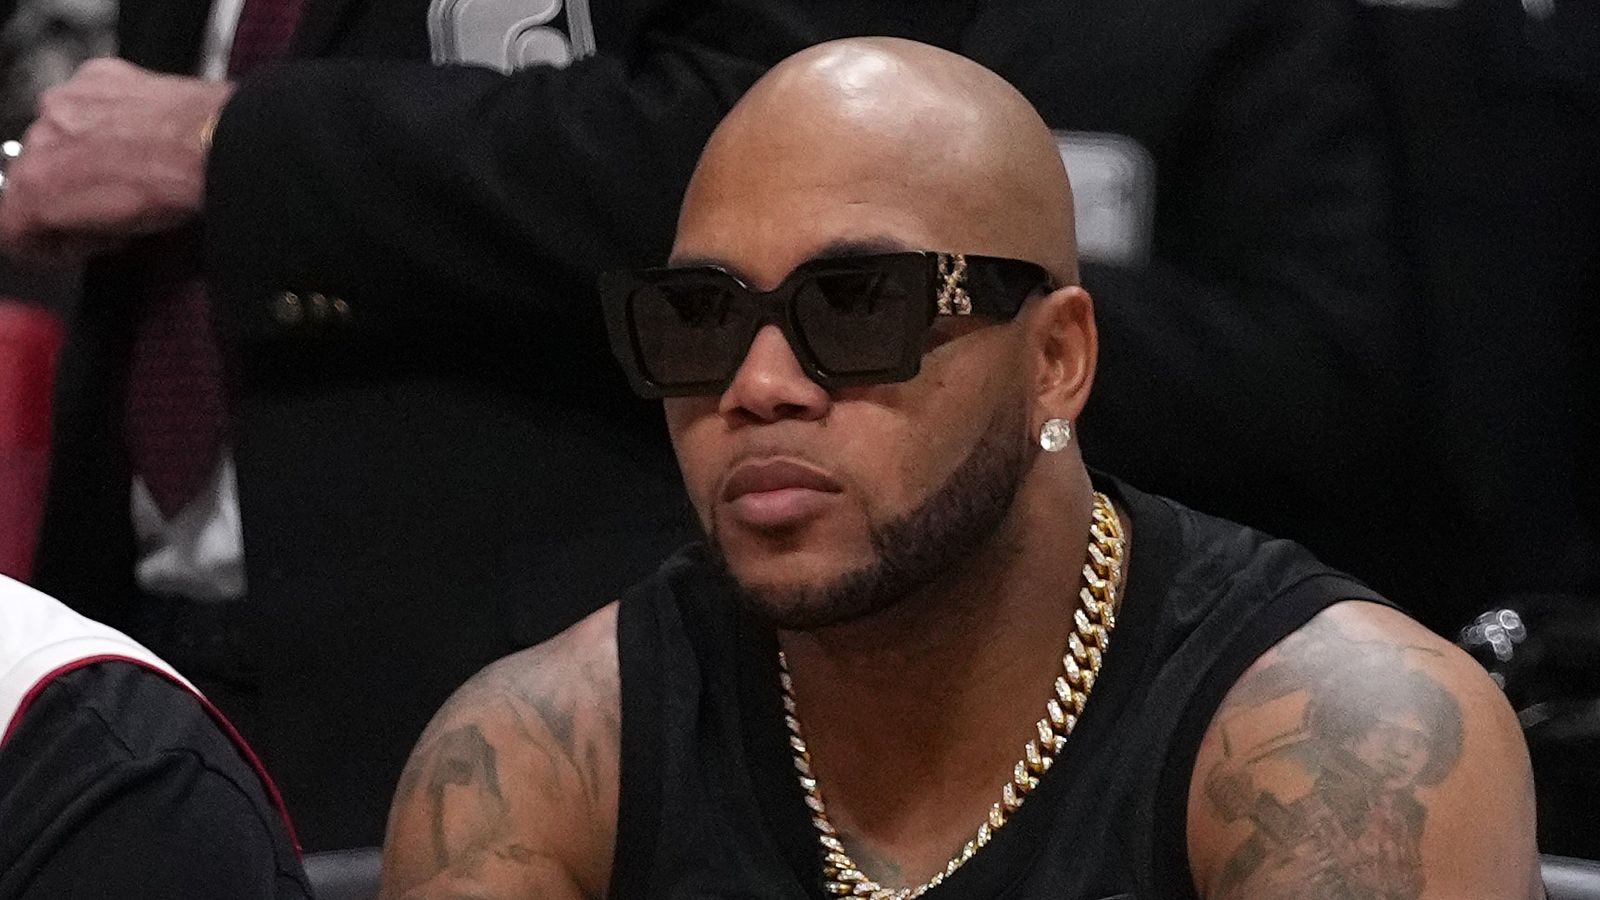 Flo Rida's 6-year-old son in intensive care after falling from 5th floor window, boy's mother says